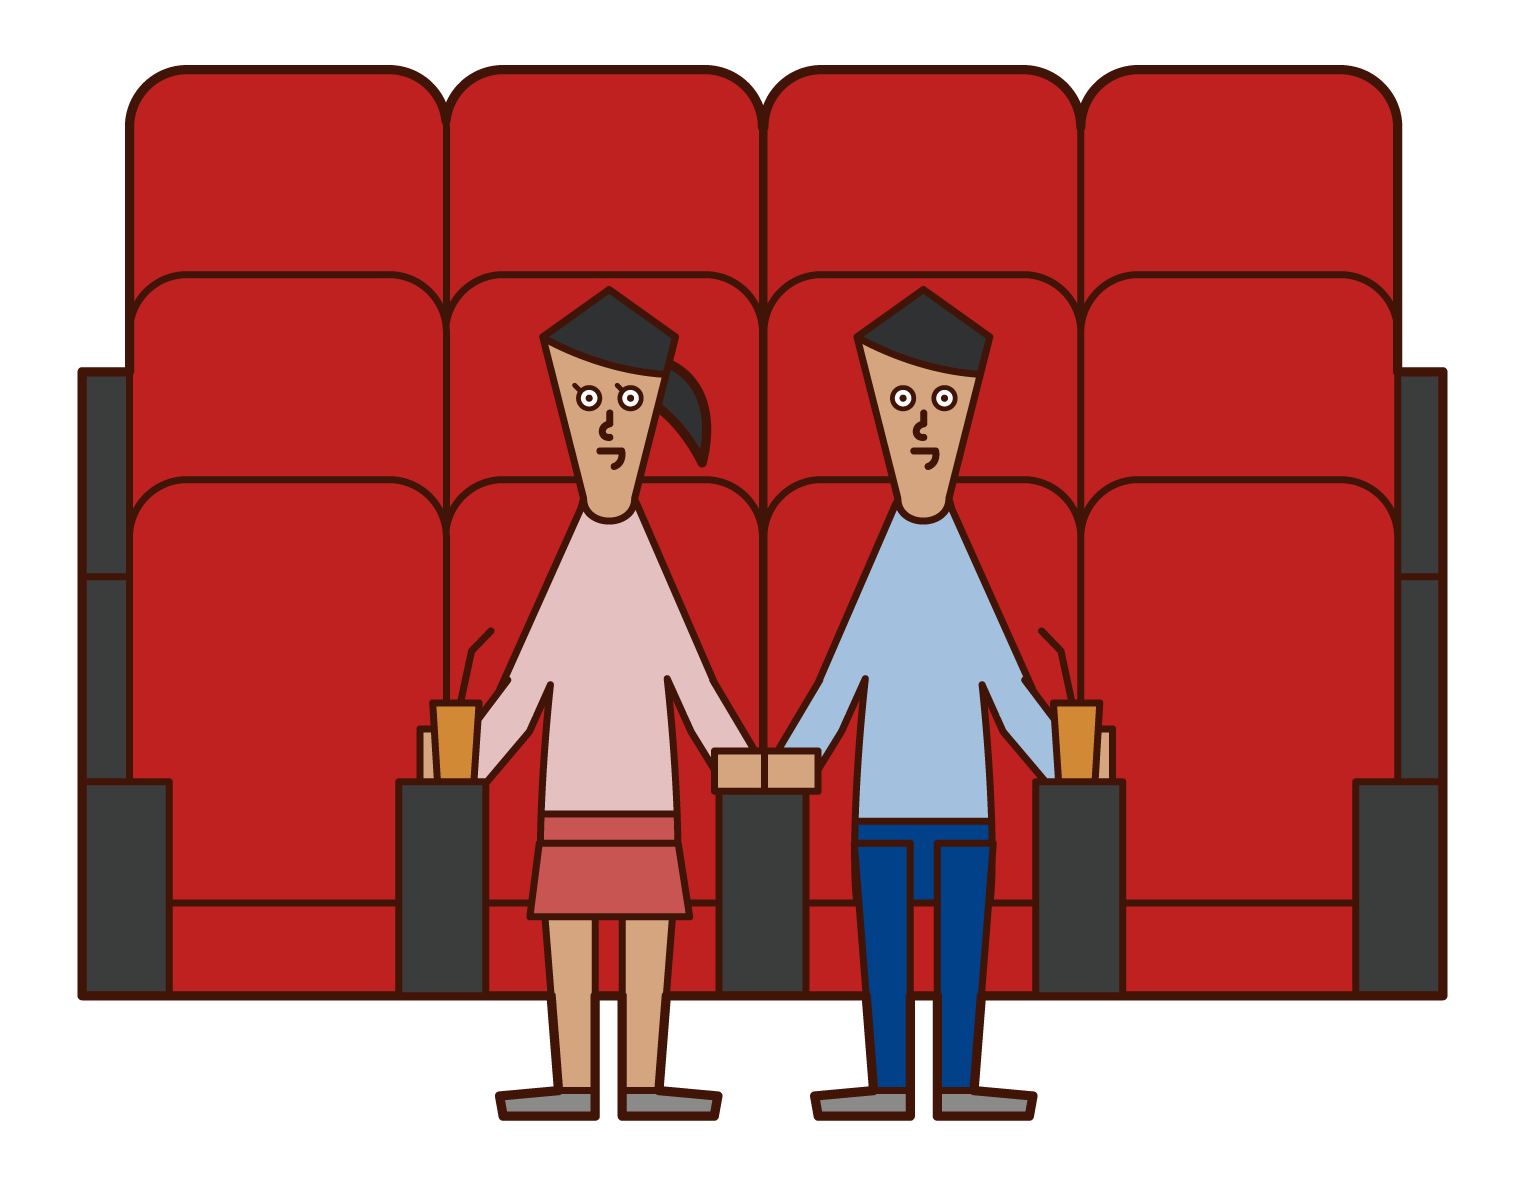 Illustrations of people watching movies in movie theaters